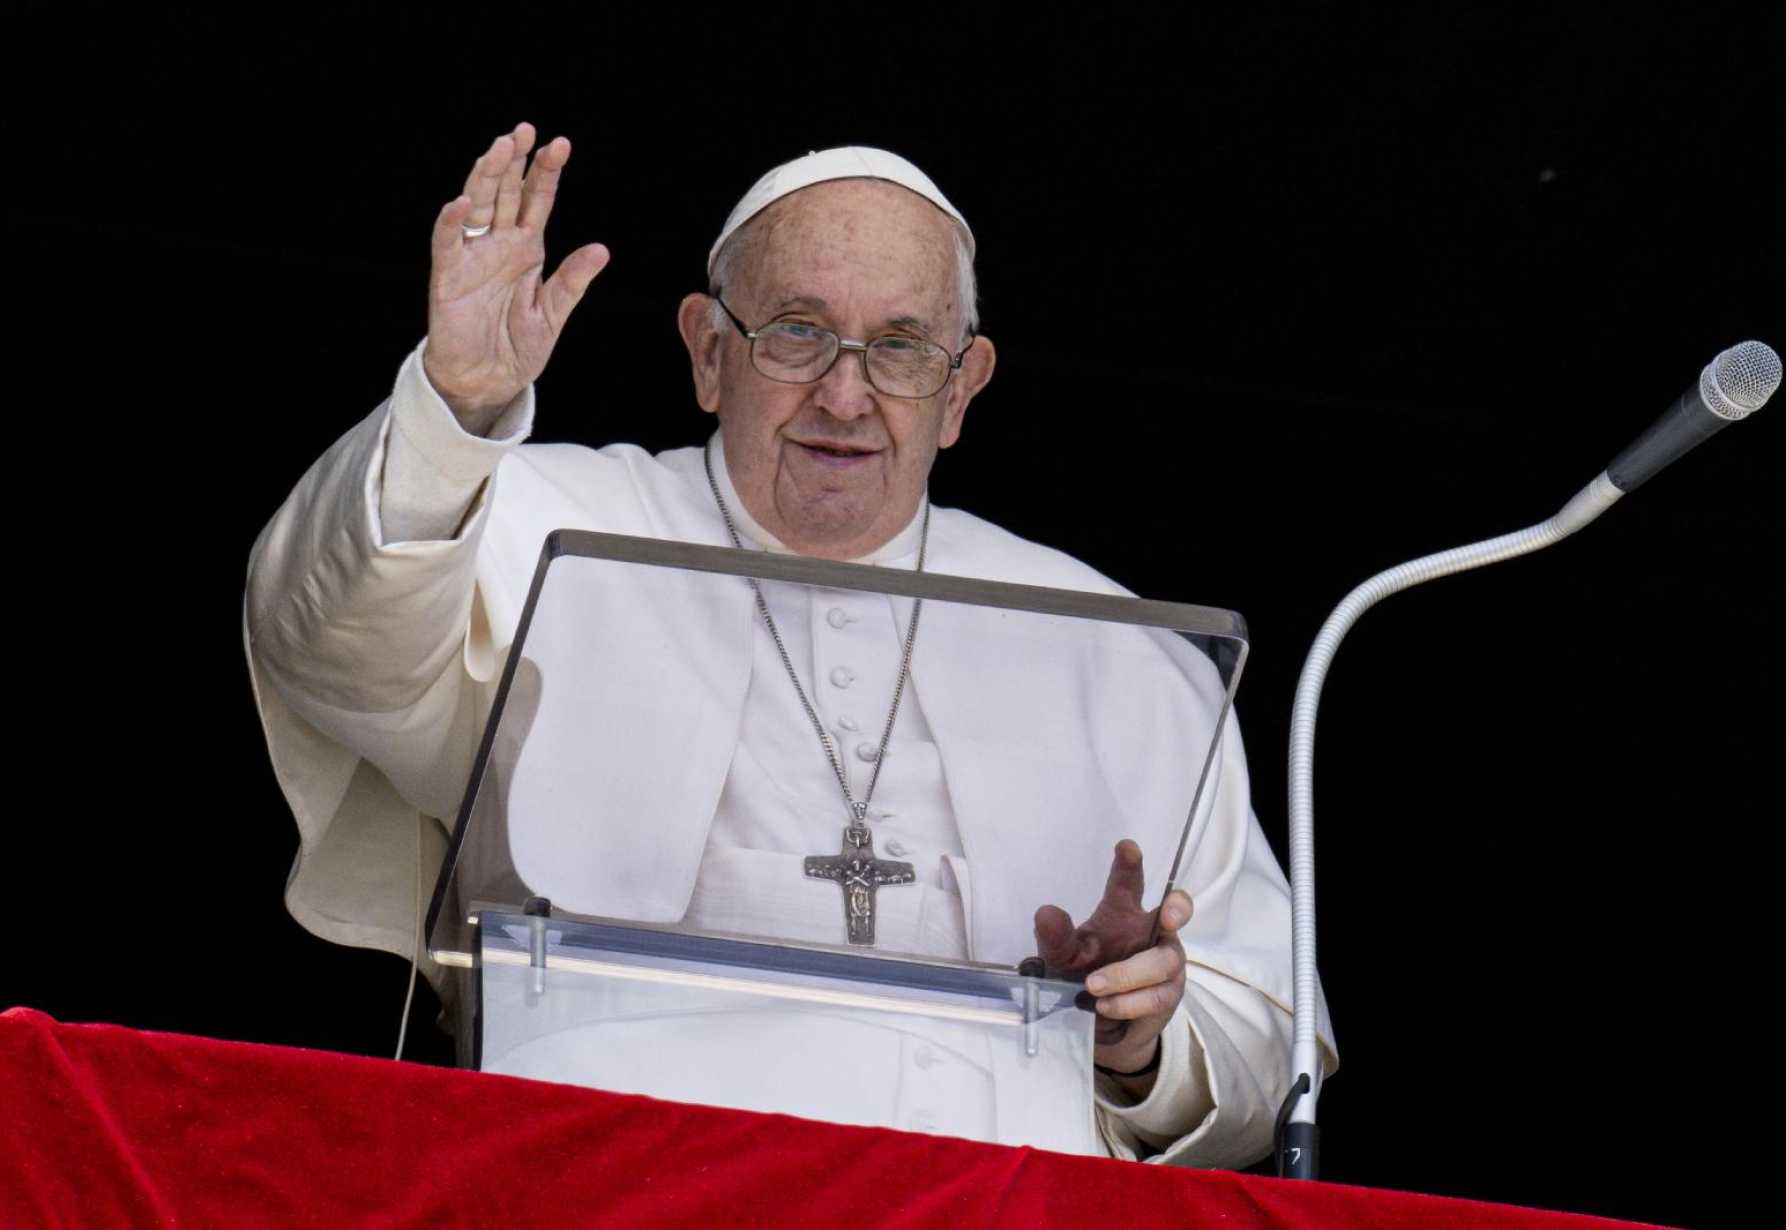 People wounded in life should find welcome in the church, pope says